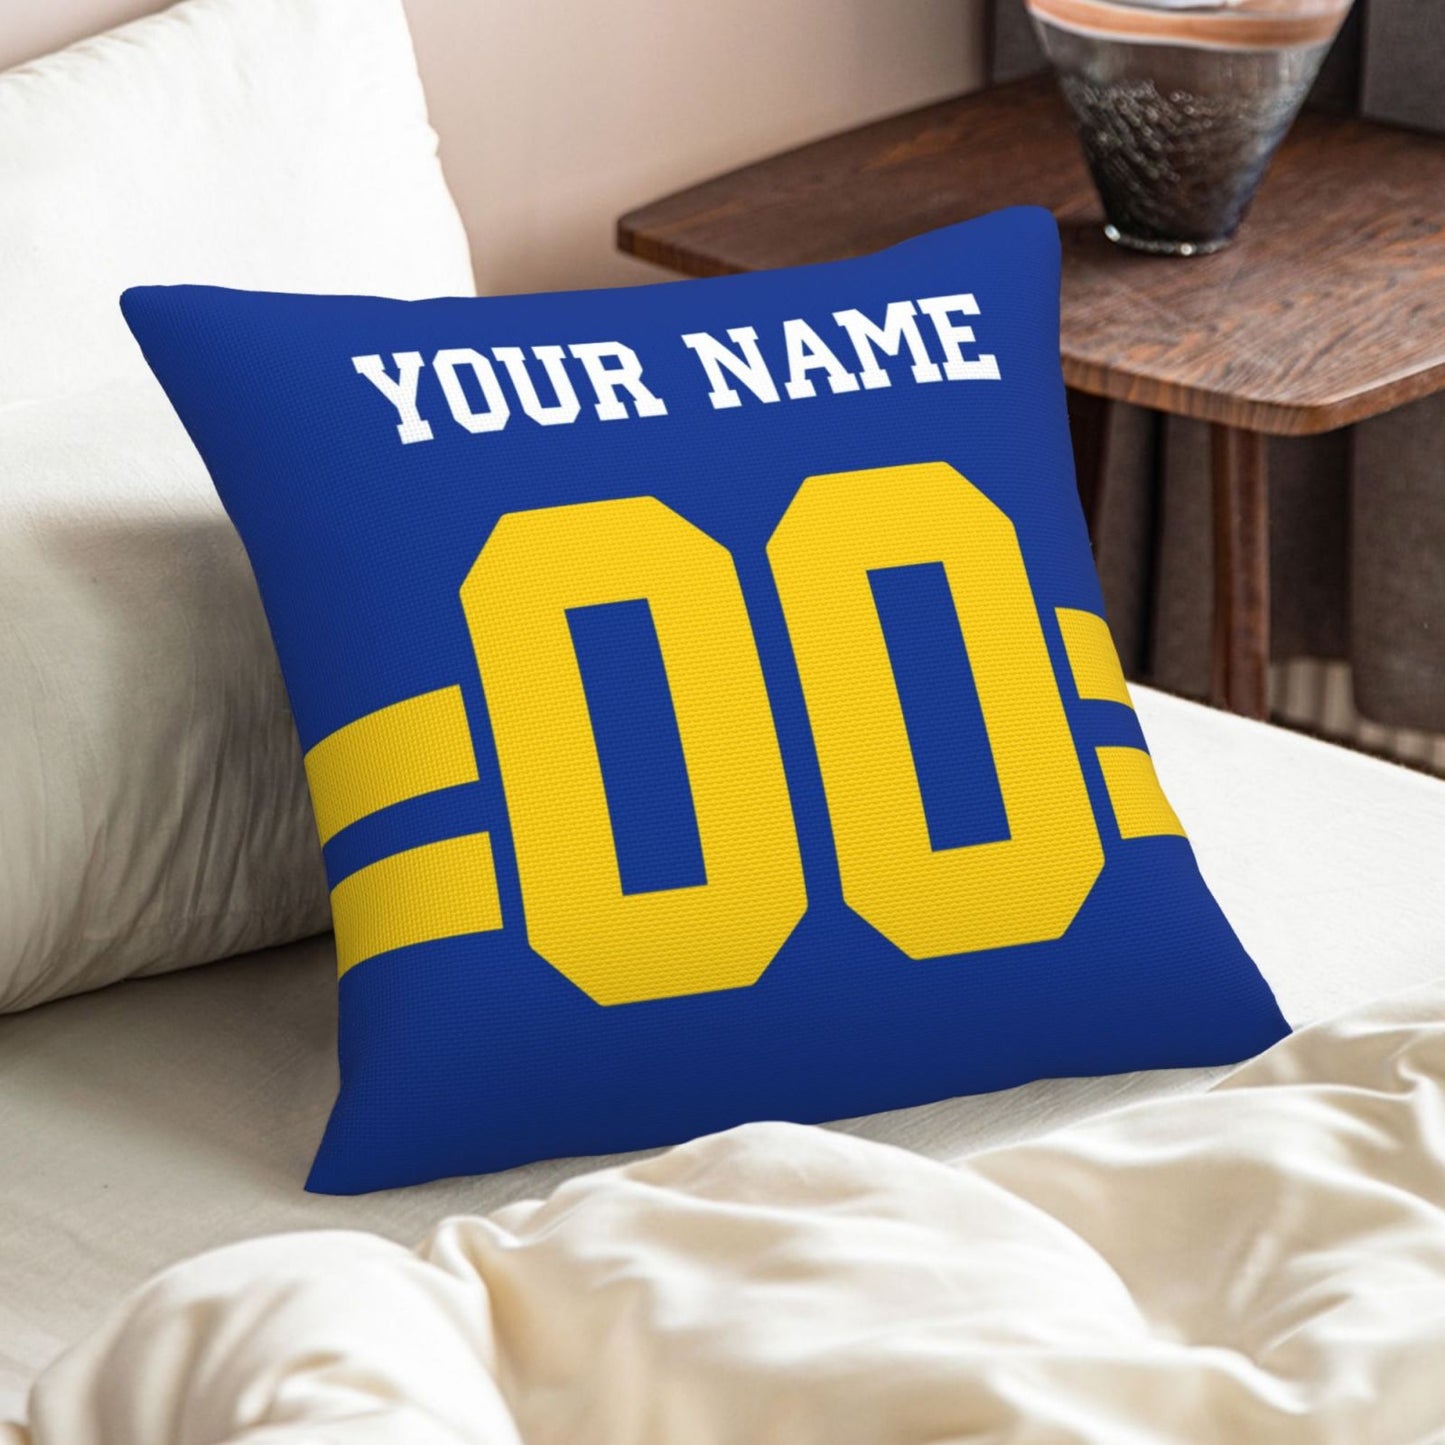 Customized Los Angeles Rams Football Team Decorative Throw Pillow Case Print Personalized Football Style Fans Letters & Number Royal Pillowcase Birthday Gift